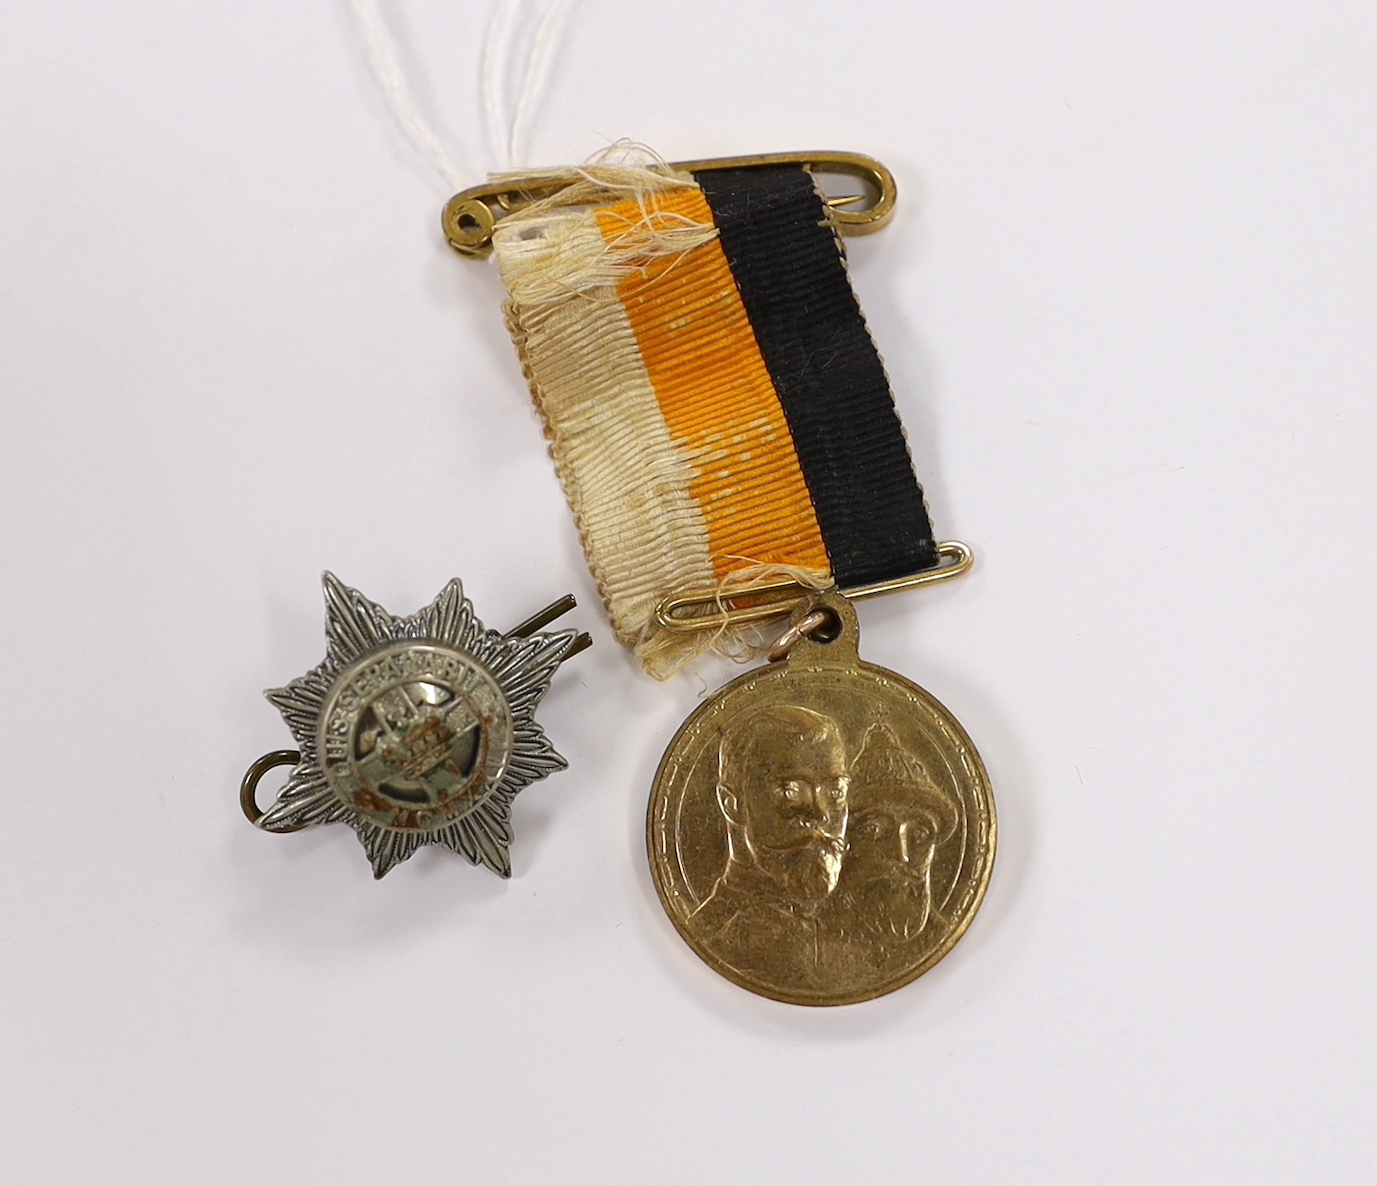 A Russian commemorative House of Romanov medal and a regimental clasp, 1922